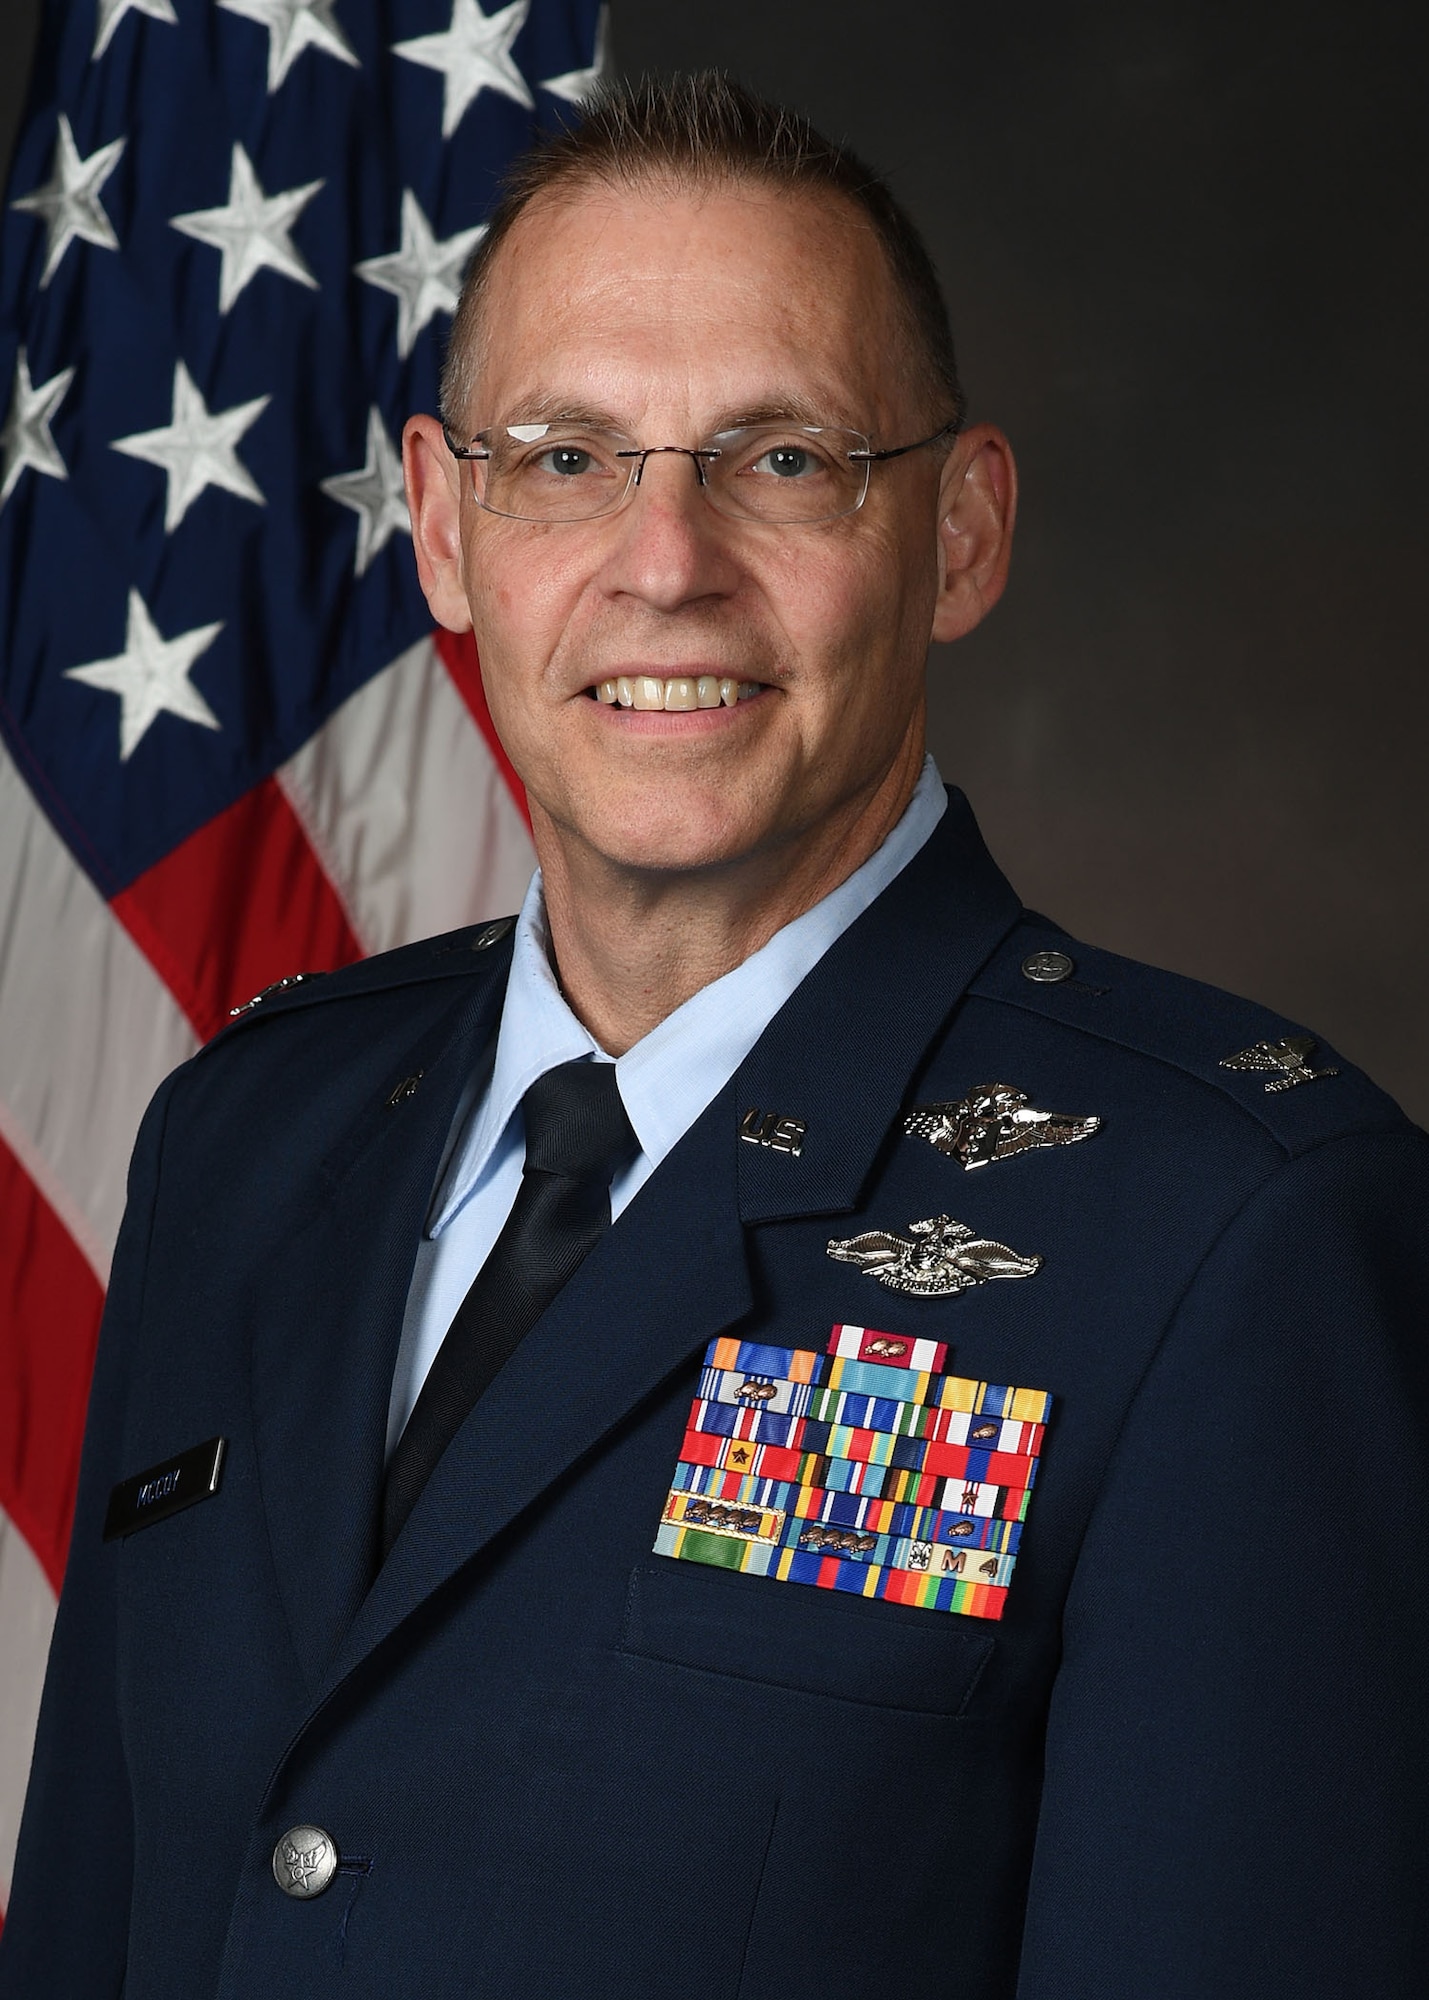 Col Robert McCoy official photo with American flag background